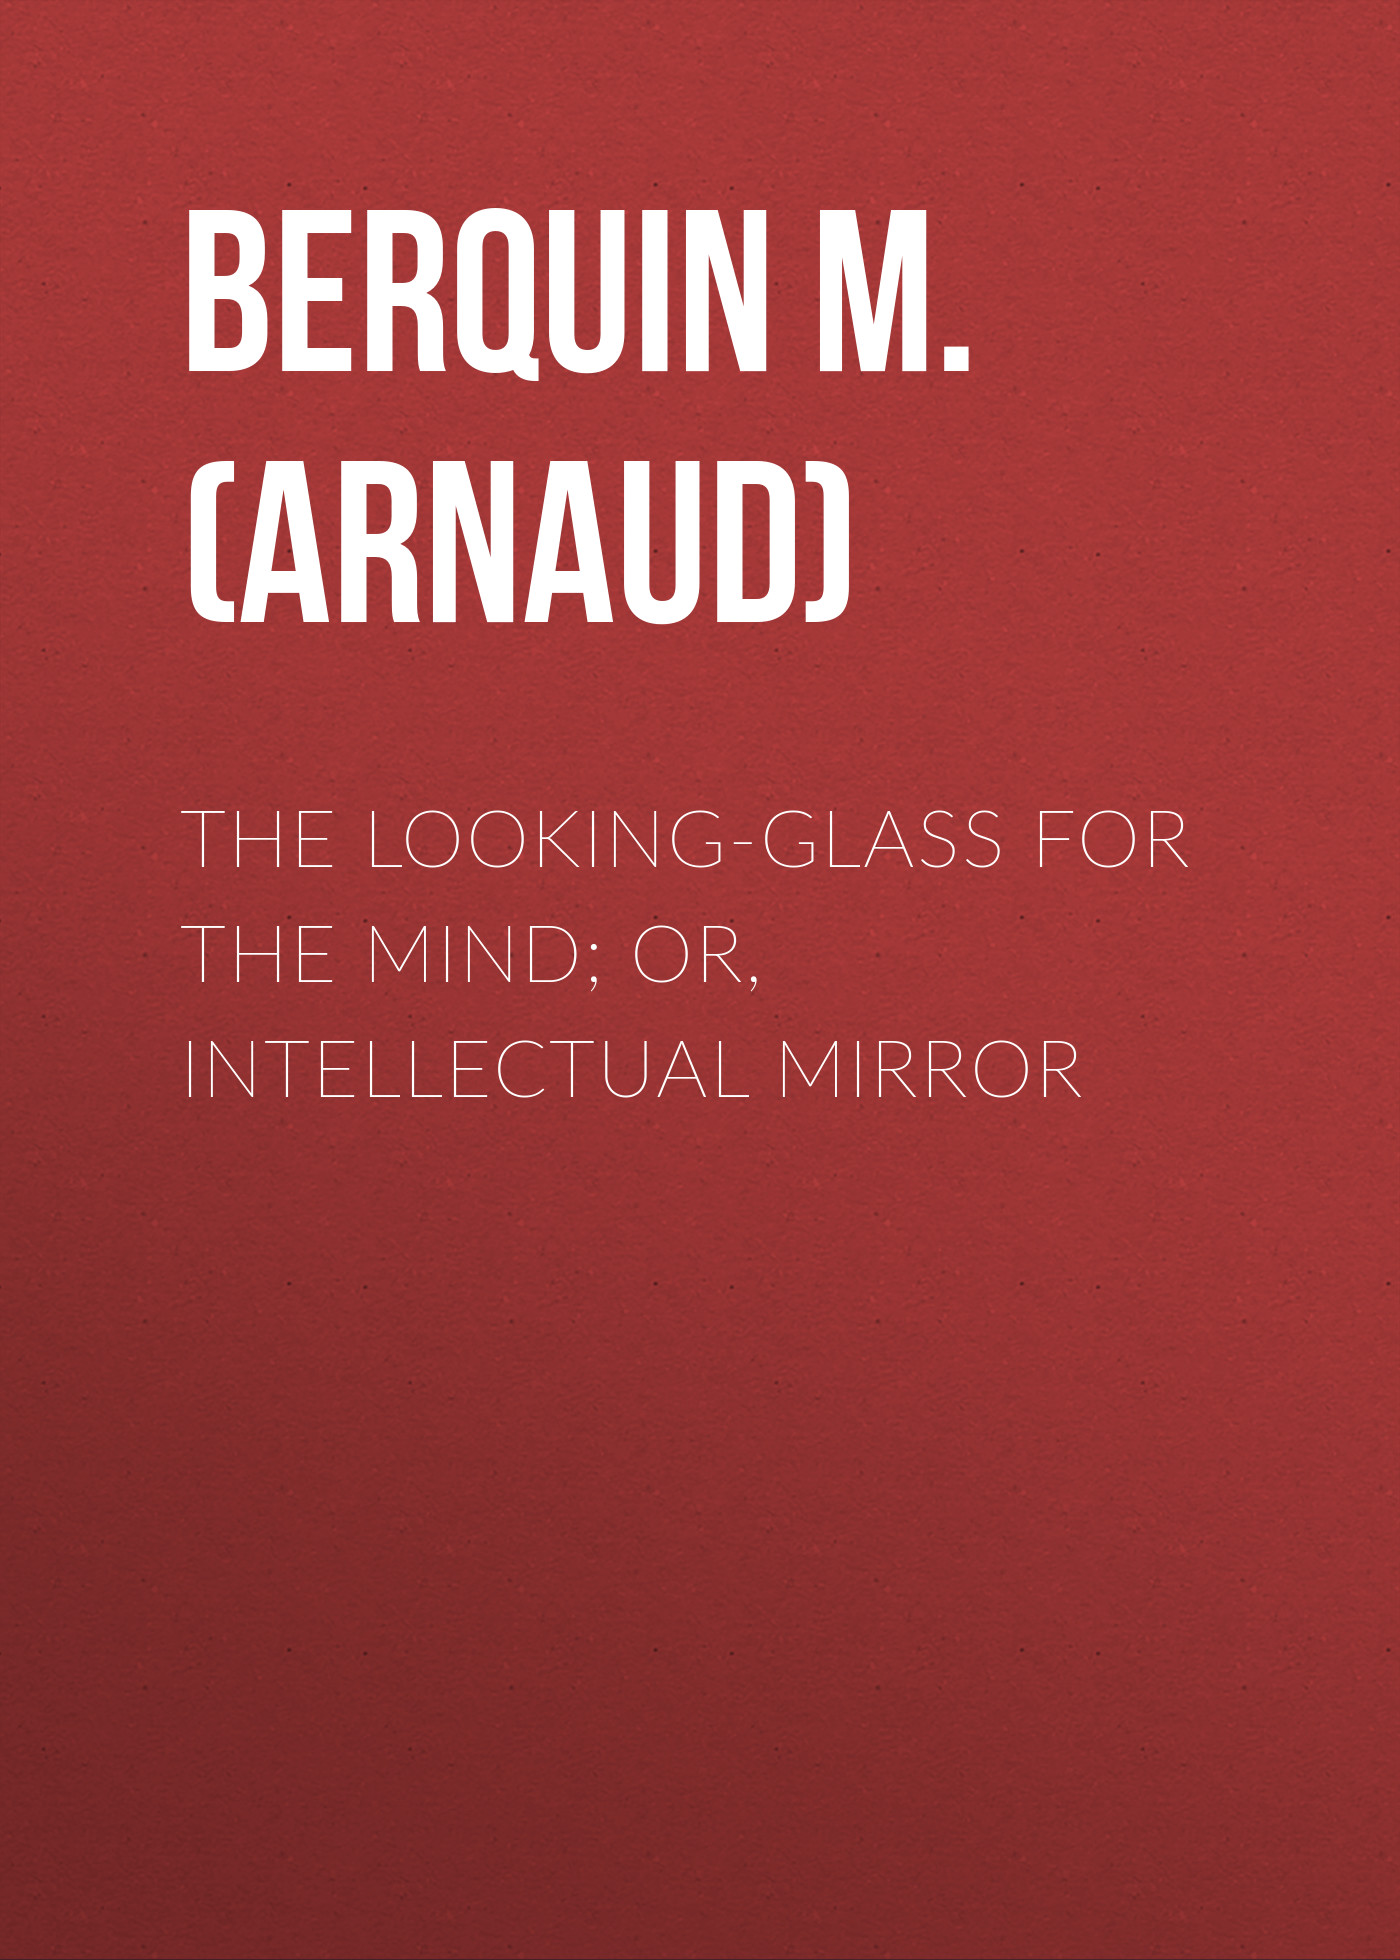 The Looking-Glass for the Mind; or, Intellectual Mirror